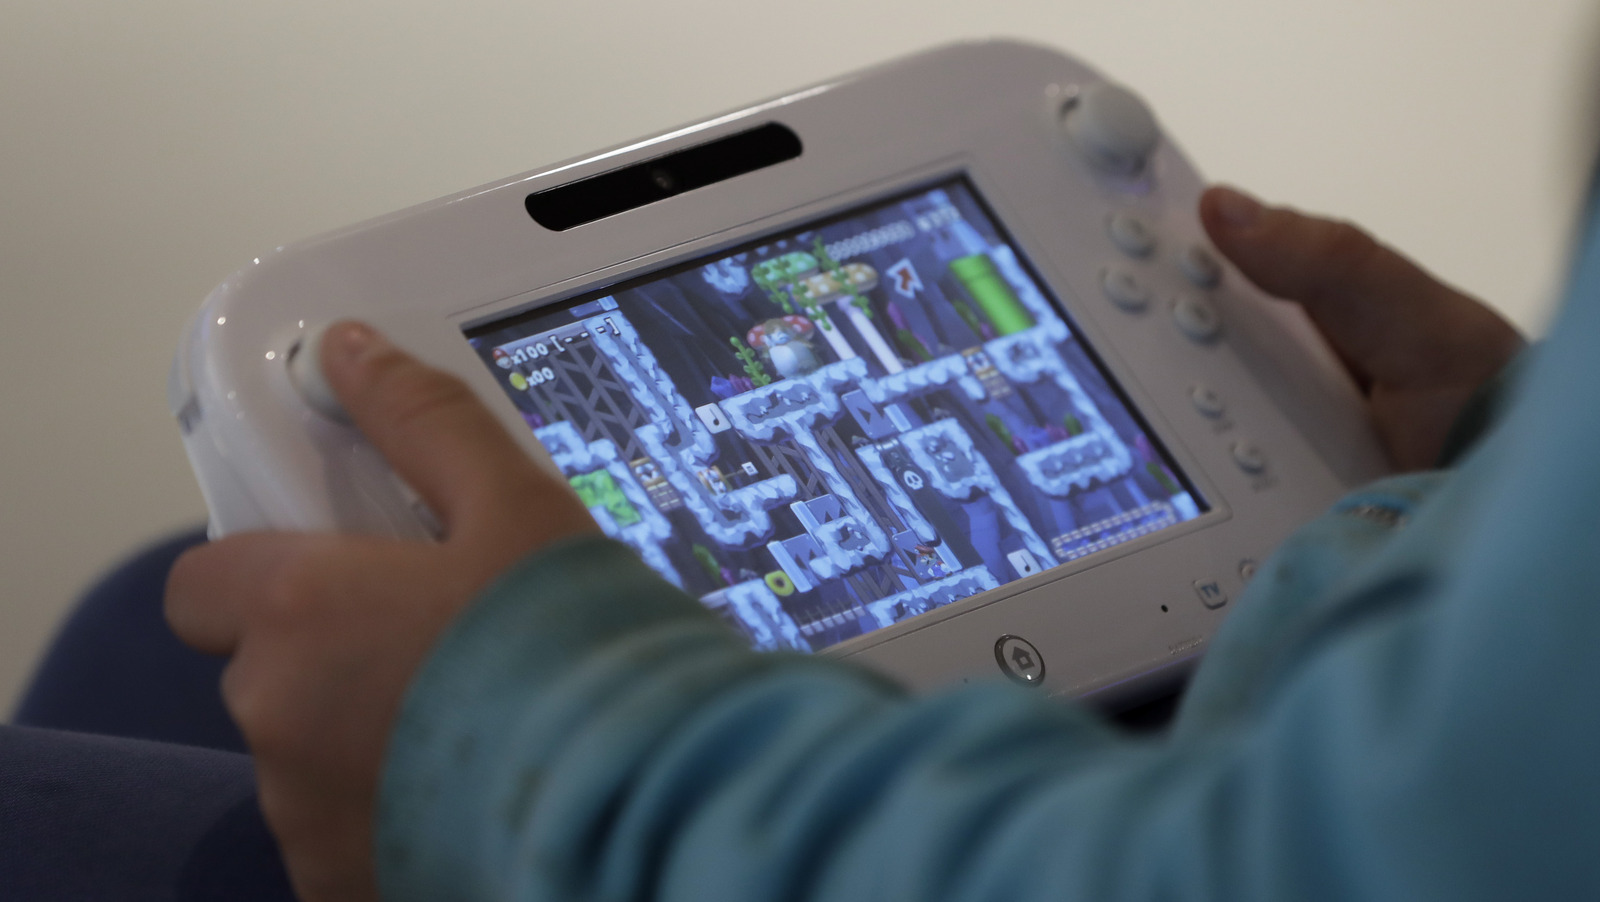 Nintendo announces final date for Wii U and 3DS eShop closure and